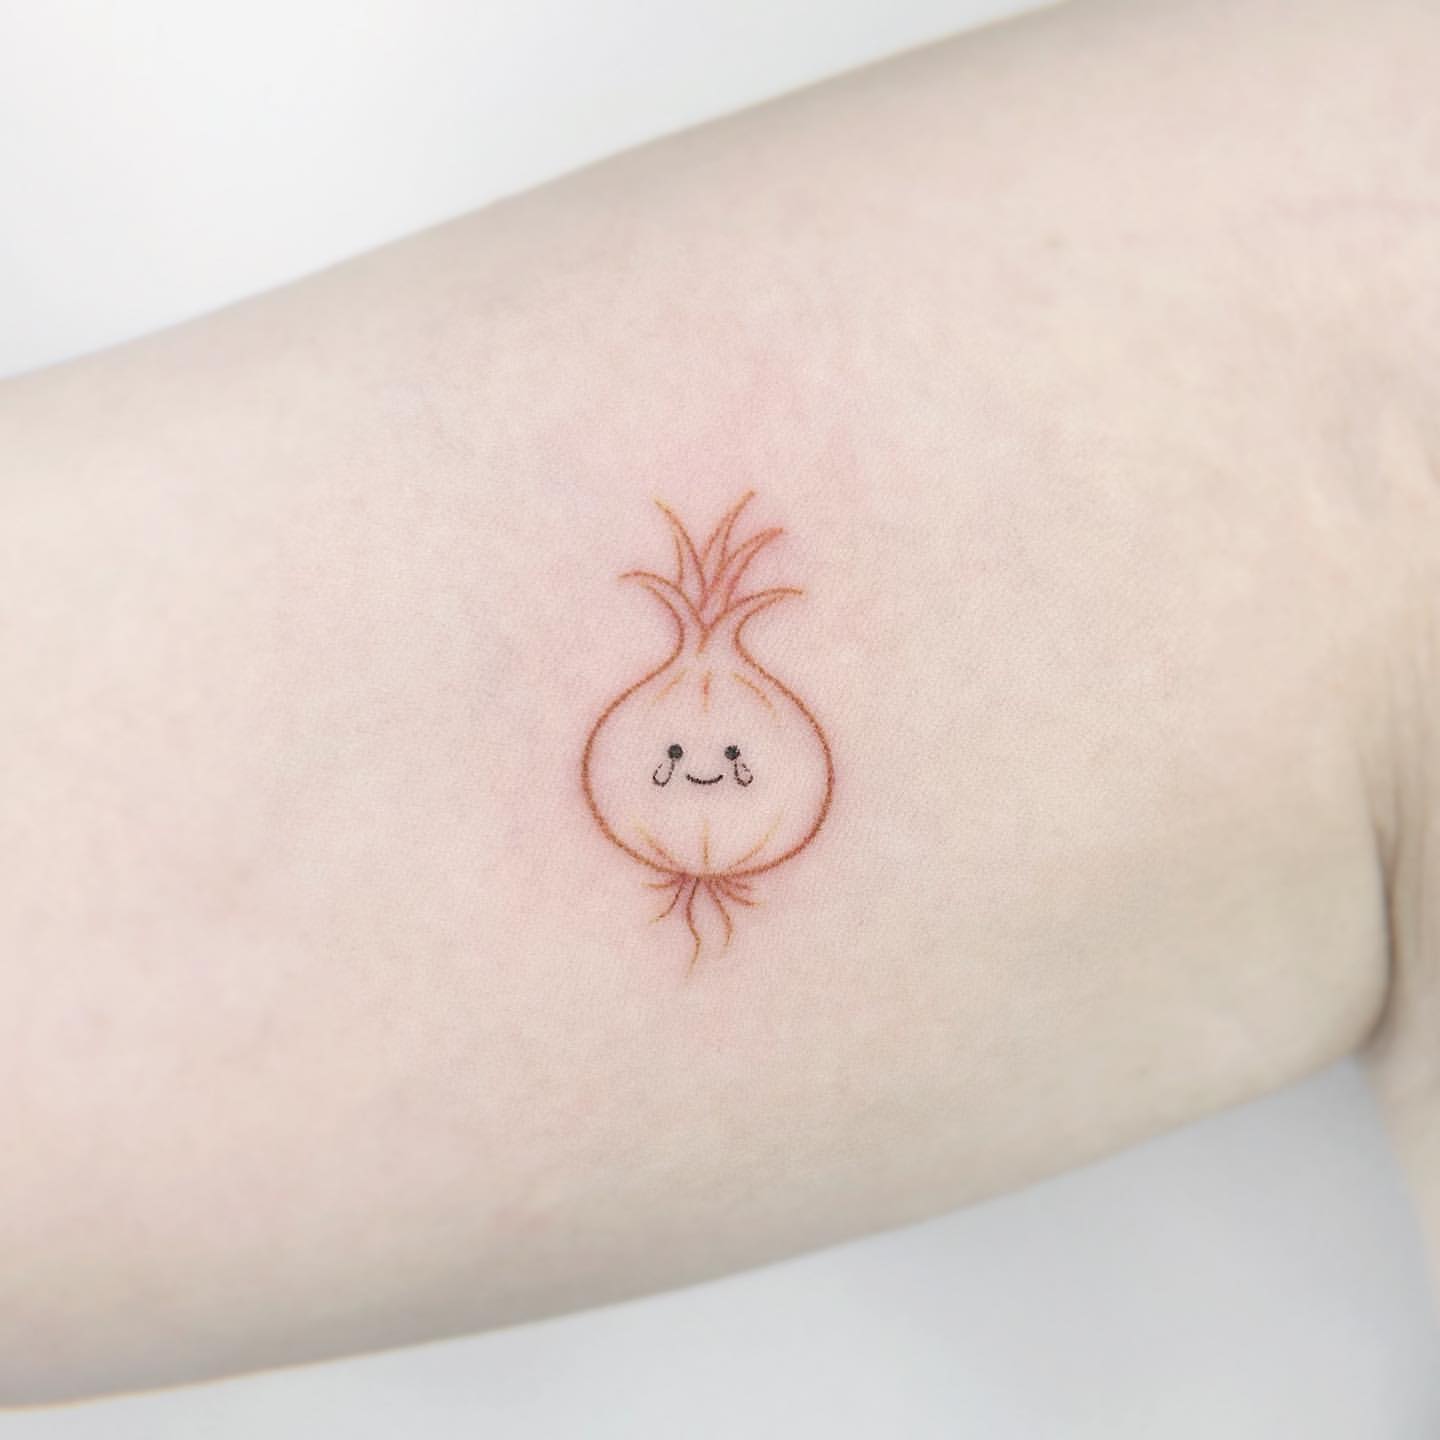 Small Tattoos for Women 32